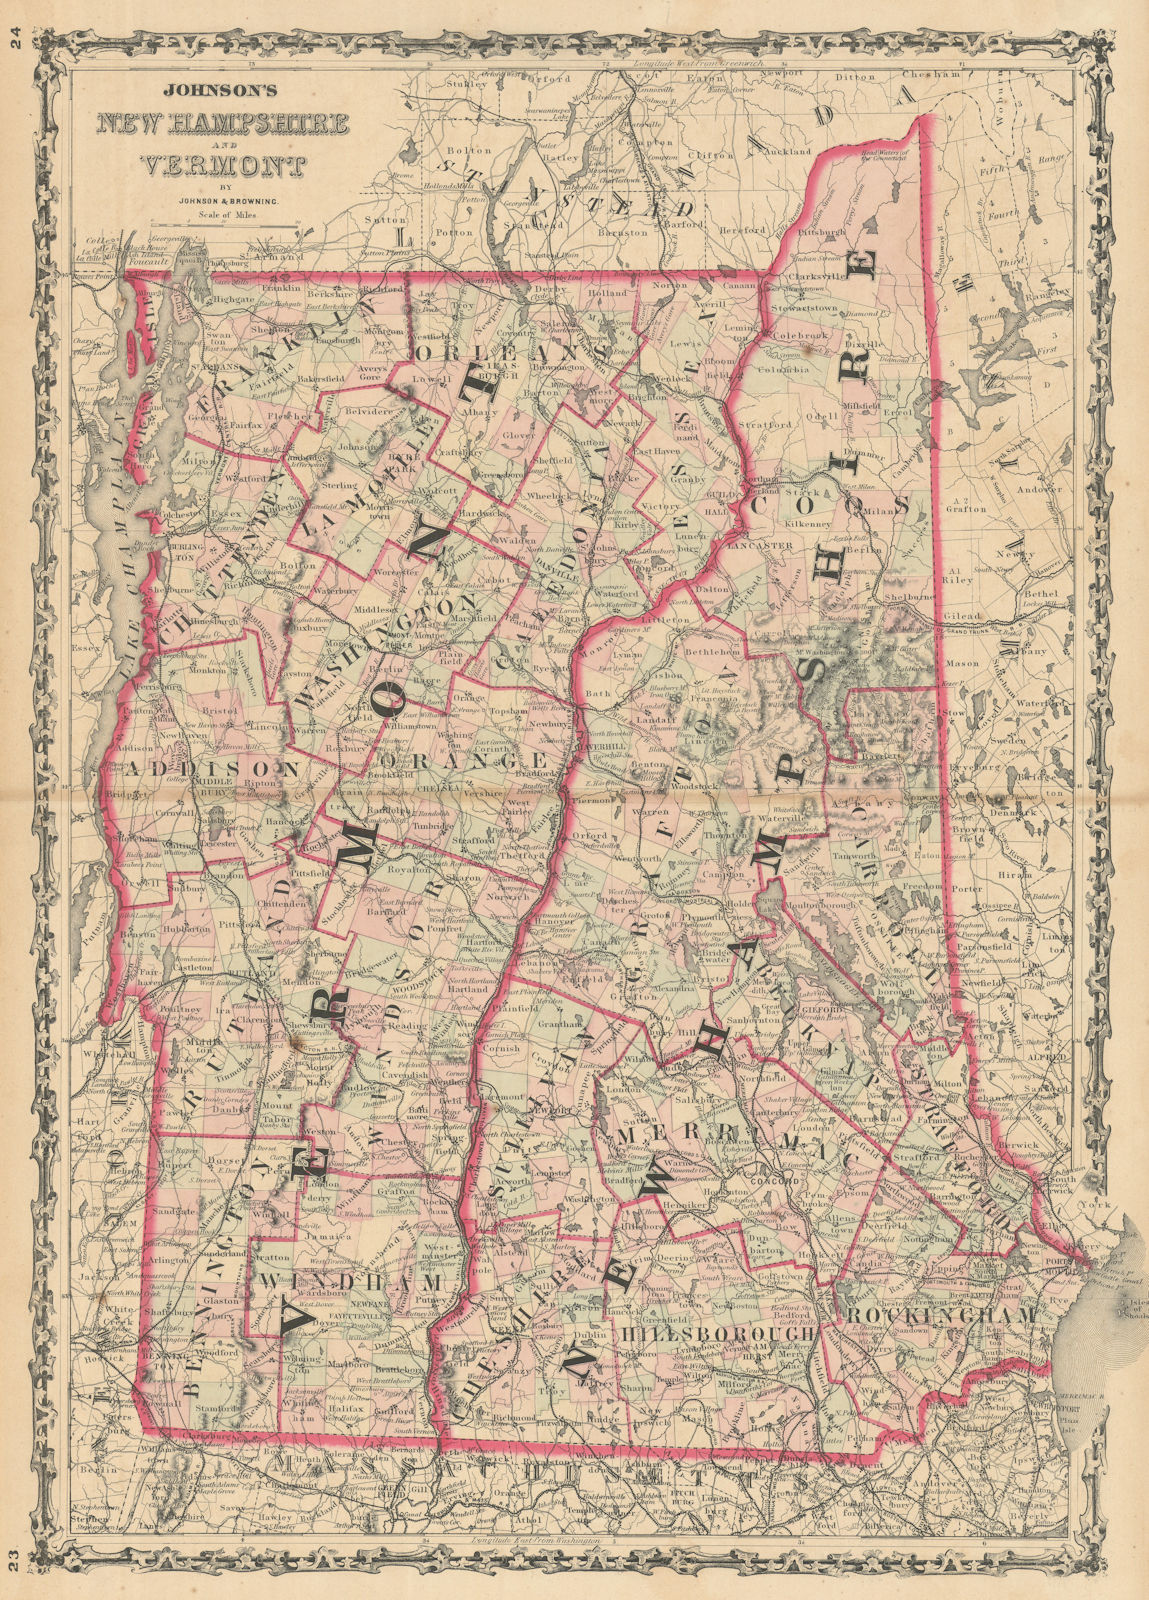 Associate Product Johnson's New Hampshire & Vermont. US State map showing counties 1861 old